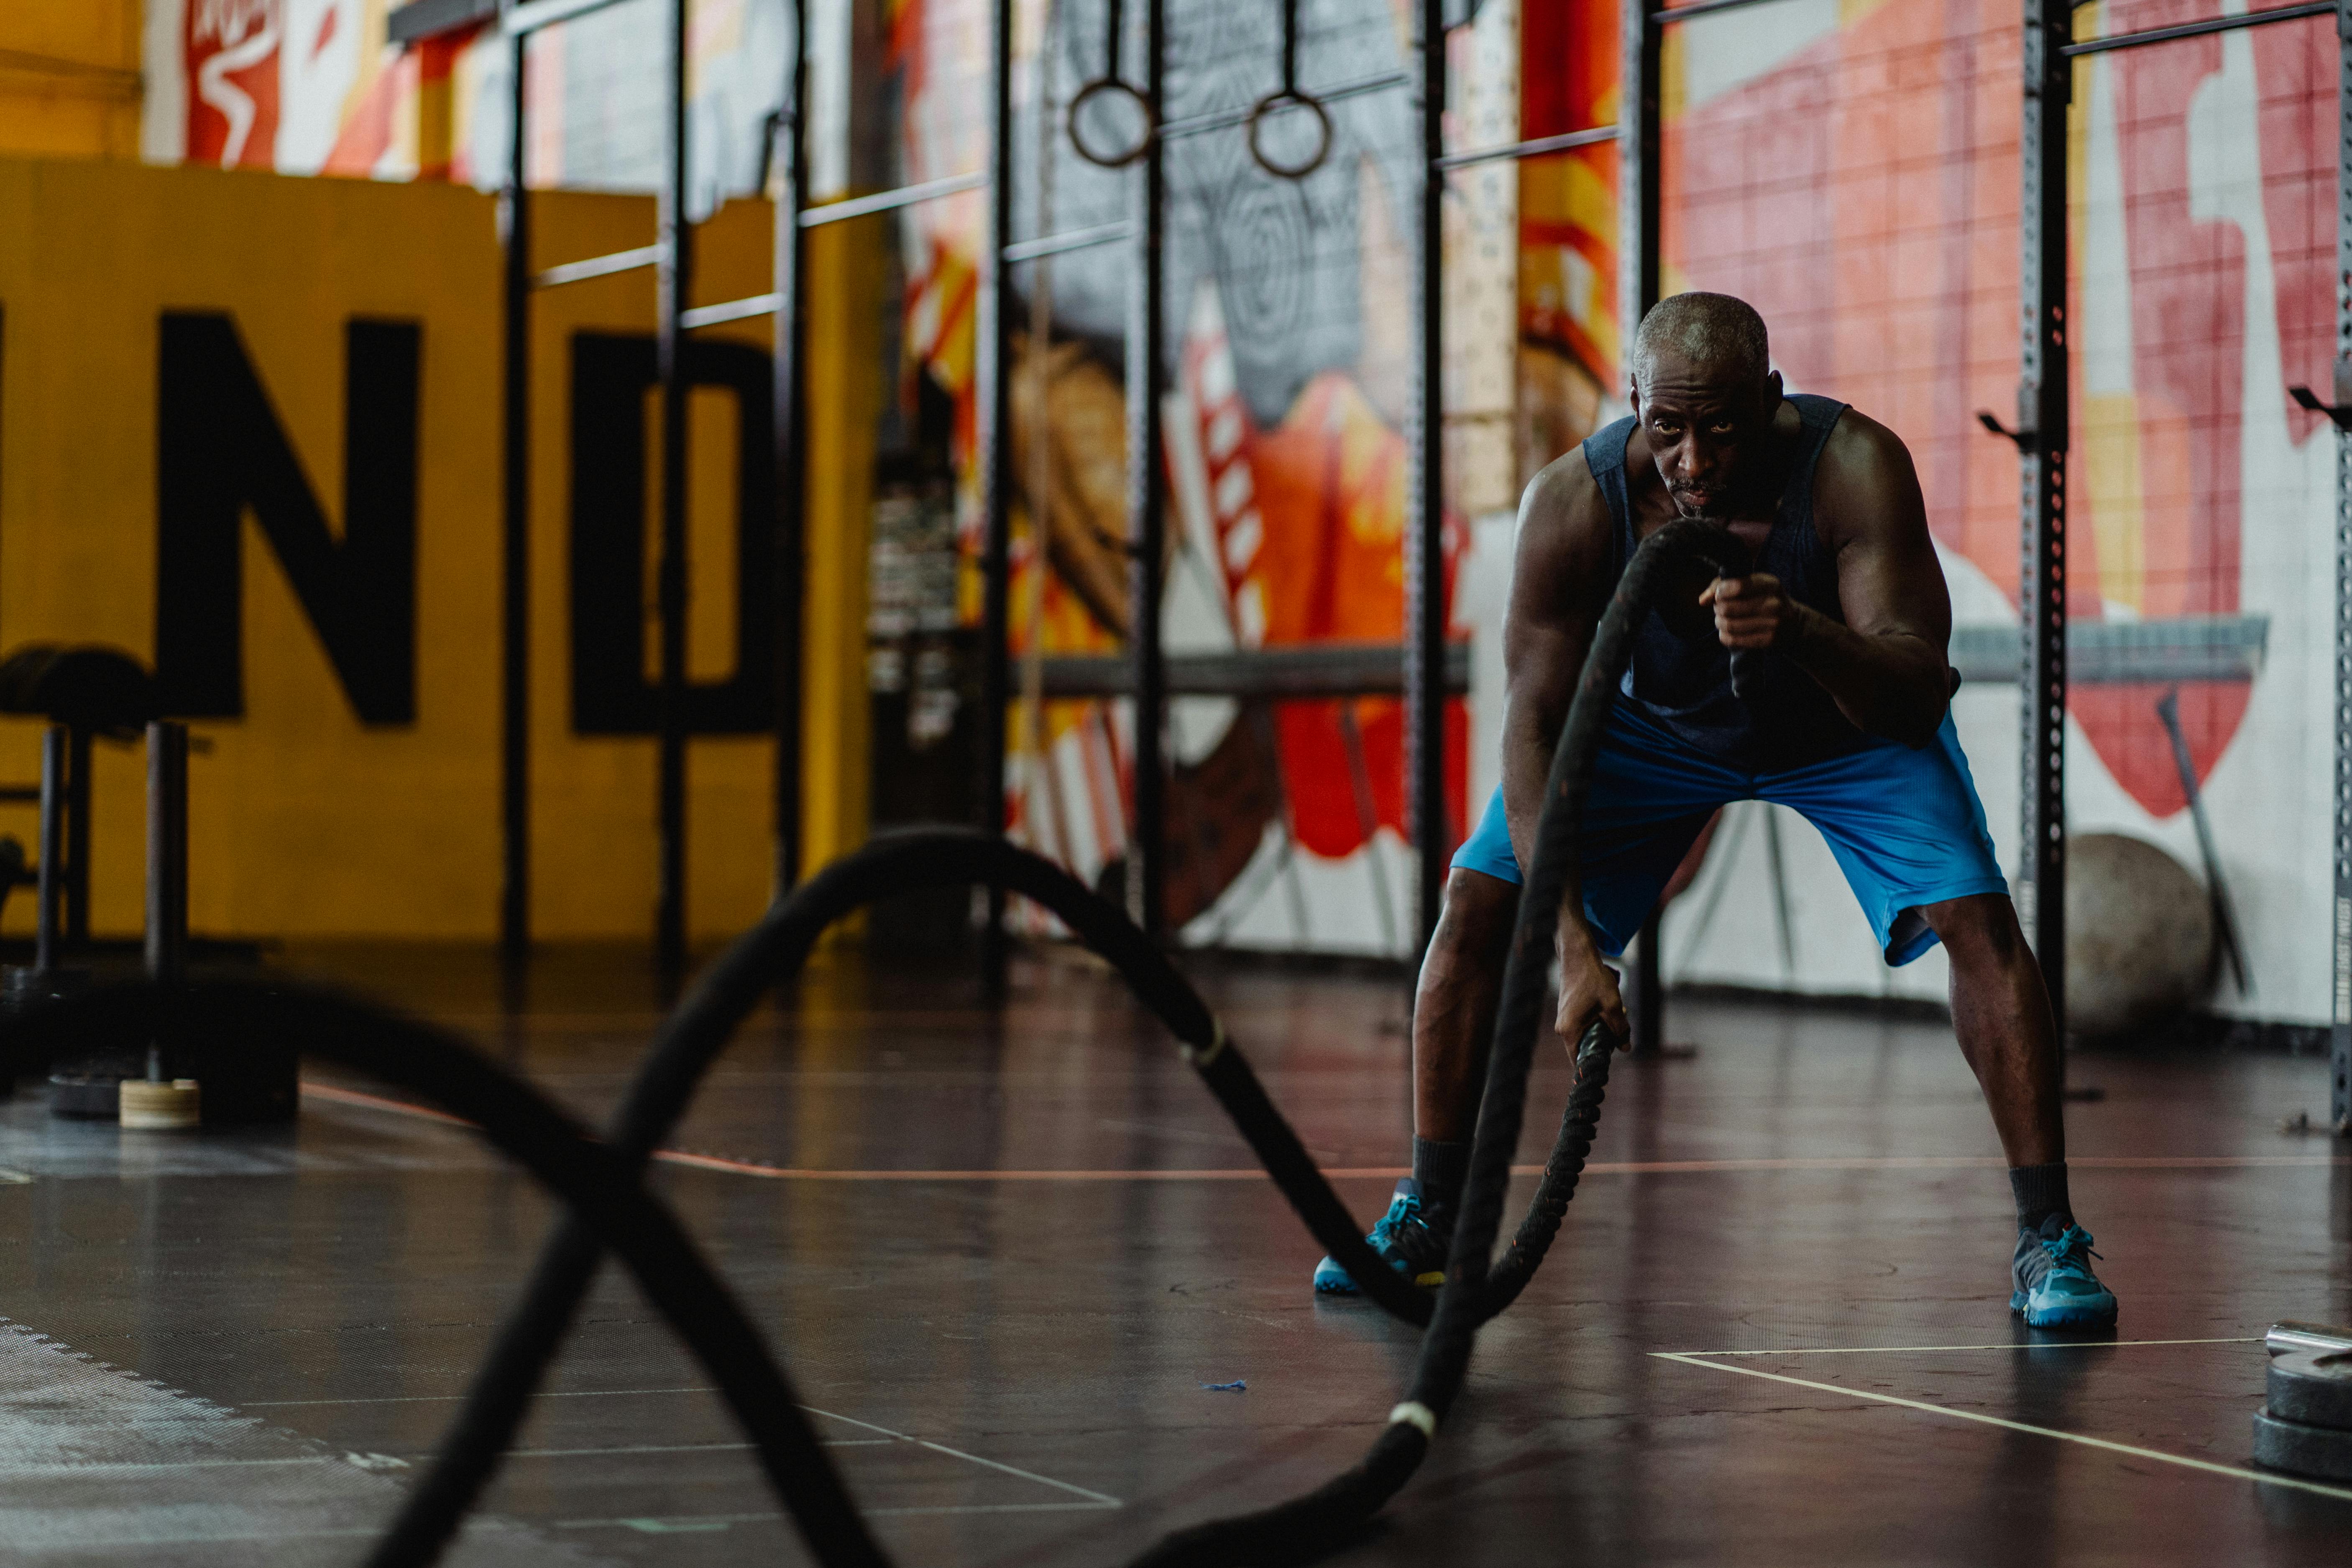 Man in Blue Shorts Doing Battle Ropes Exercise